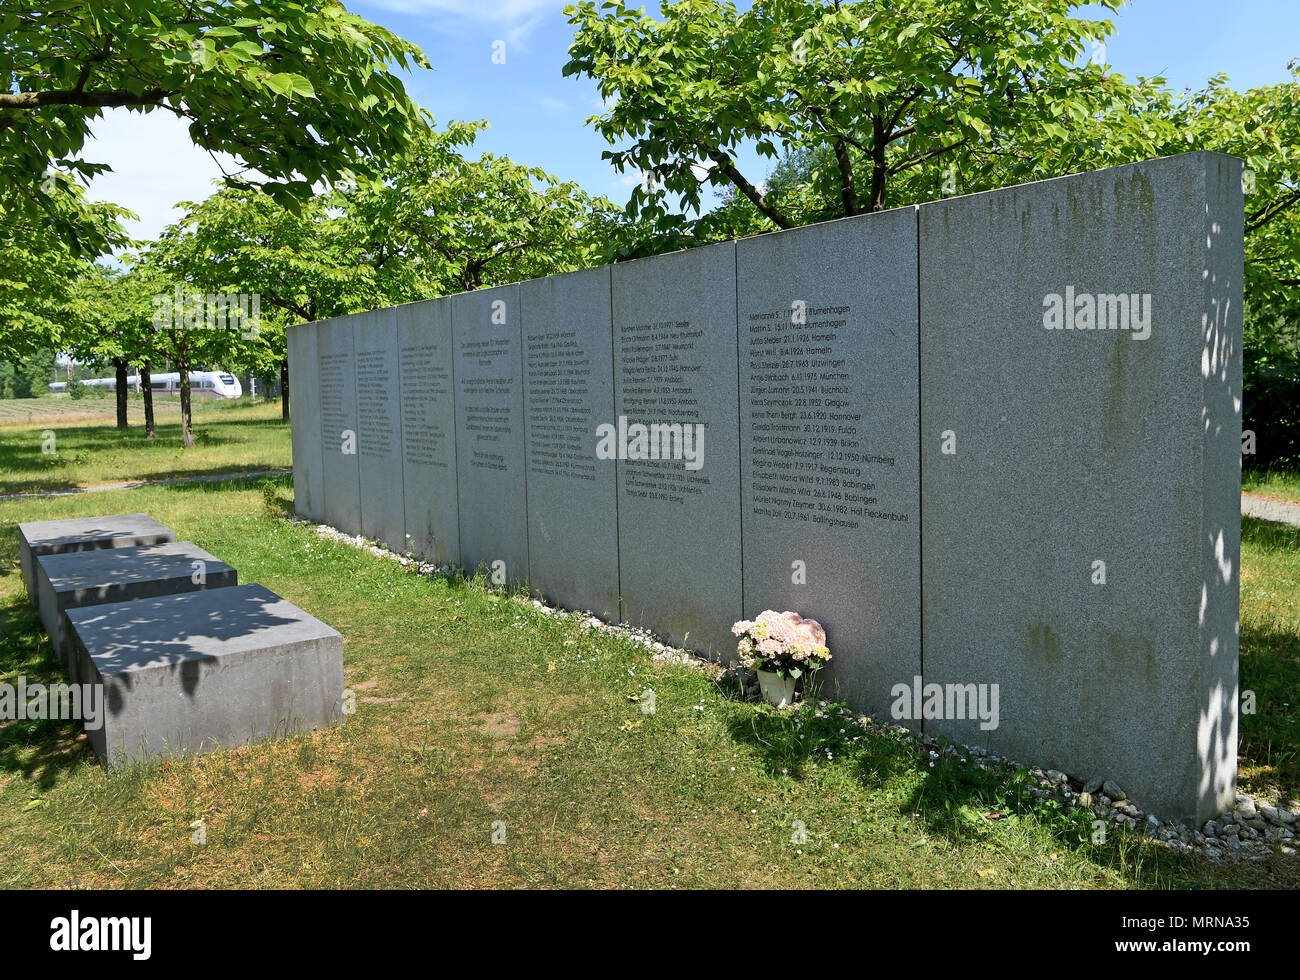 24 May 2018, Germany, Eschede: An Inter City Express (ICE) train passes the memorial site for the 1998 Eschede ICE derailment, where 101 cherry trees have been planted. On 3 June 1998, the ICE 884 'Wilhelm Conrad Roentgen' derailed on the Hannover-Hamburg route near the village of Eschede. 101 people died. Photo: Holger Hollemann/dpa Stock Photo